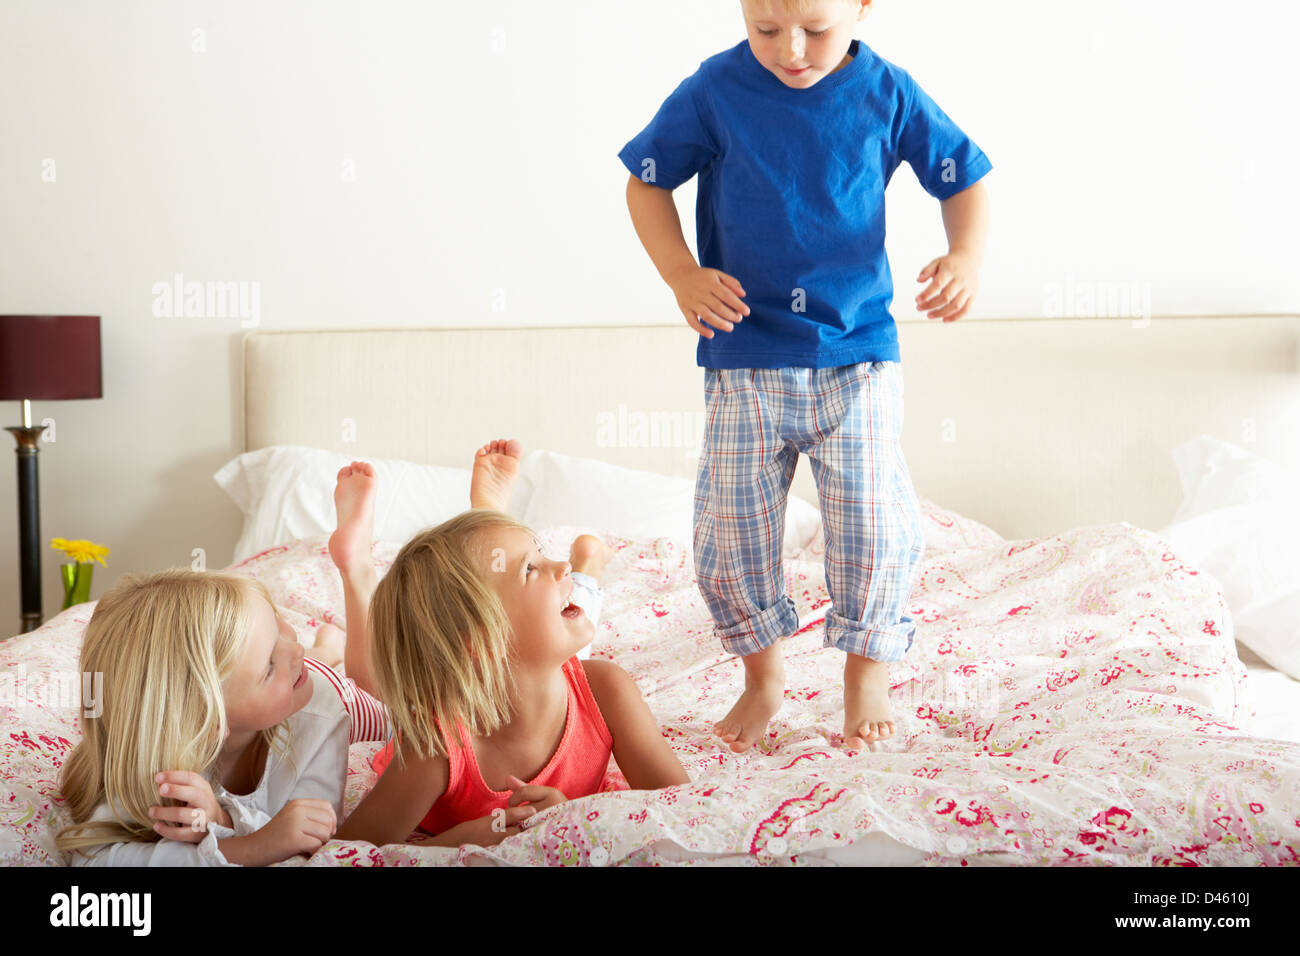 Children Bouncing On Bed Stock Photo